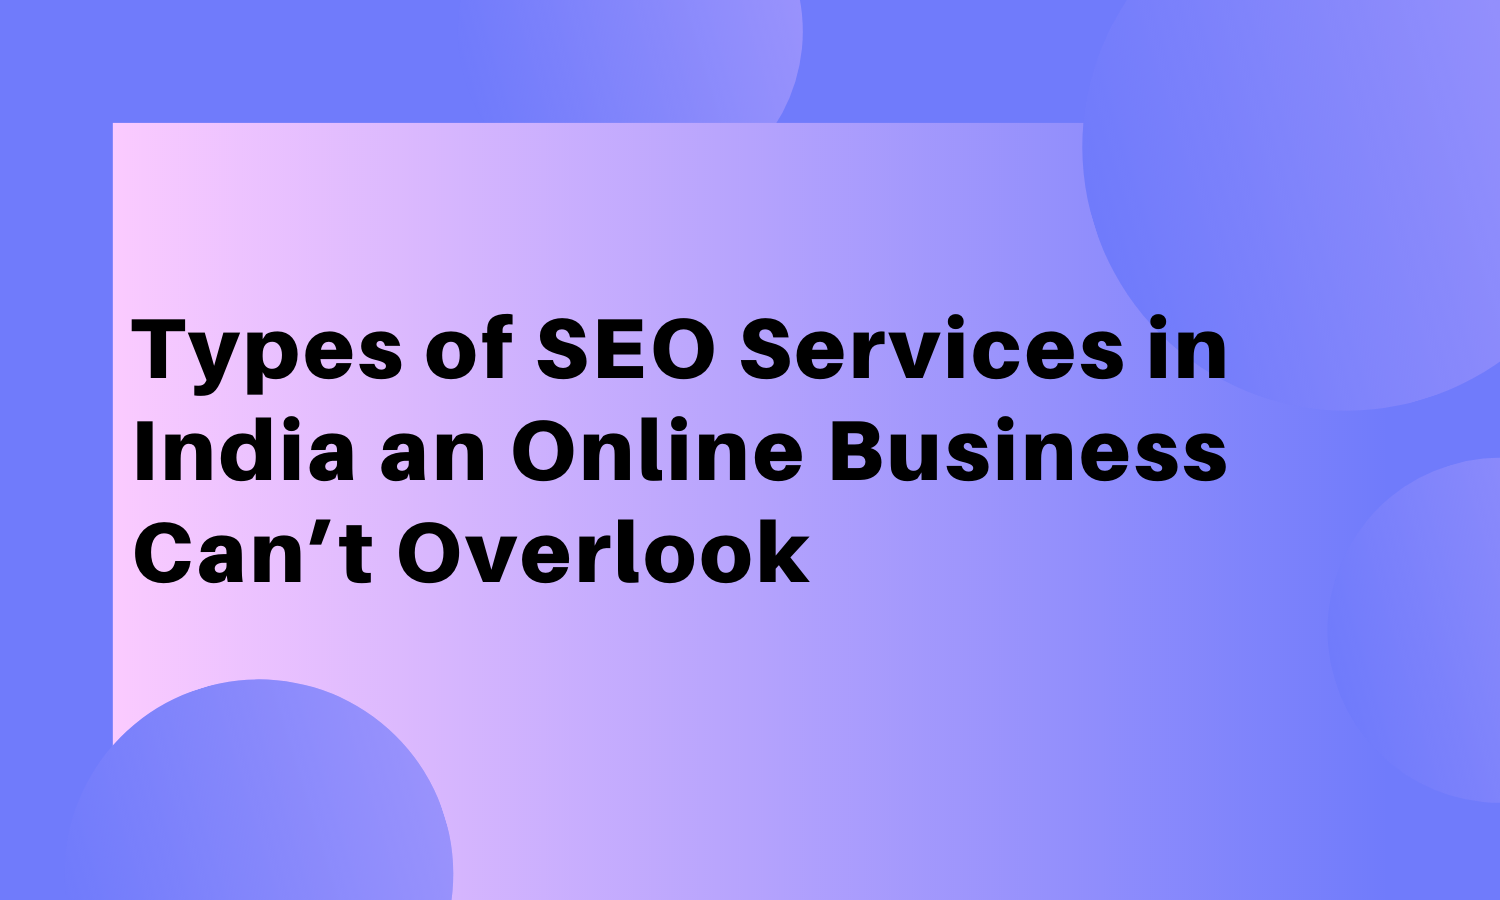 public/uploads/2021/07/SEO-Services-in-India.png